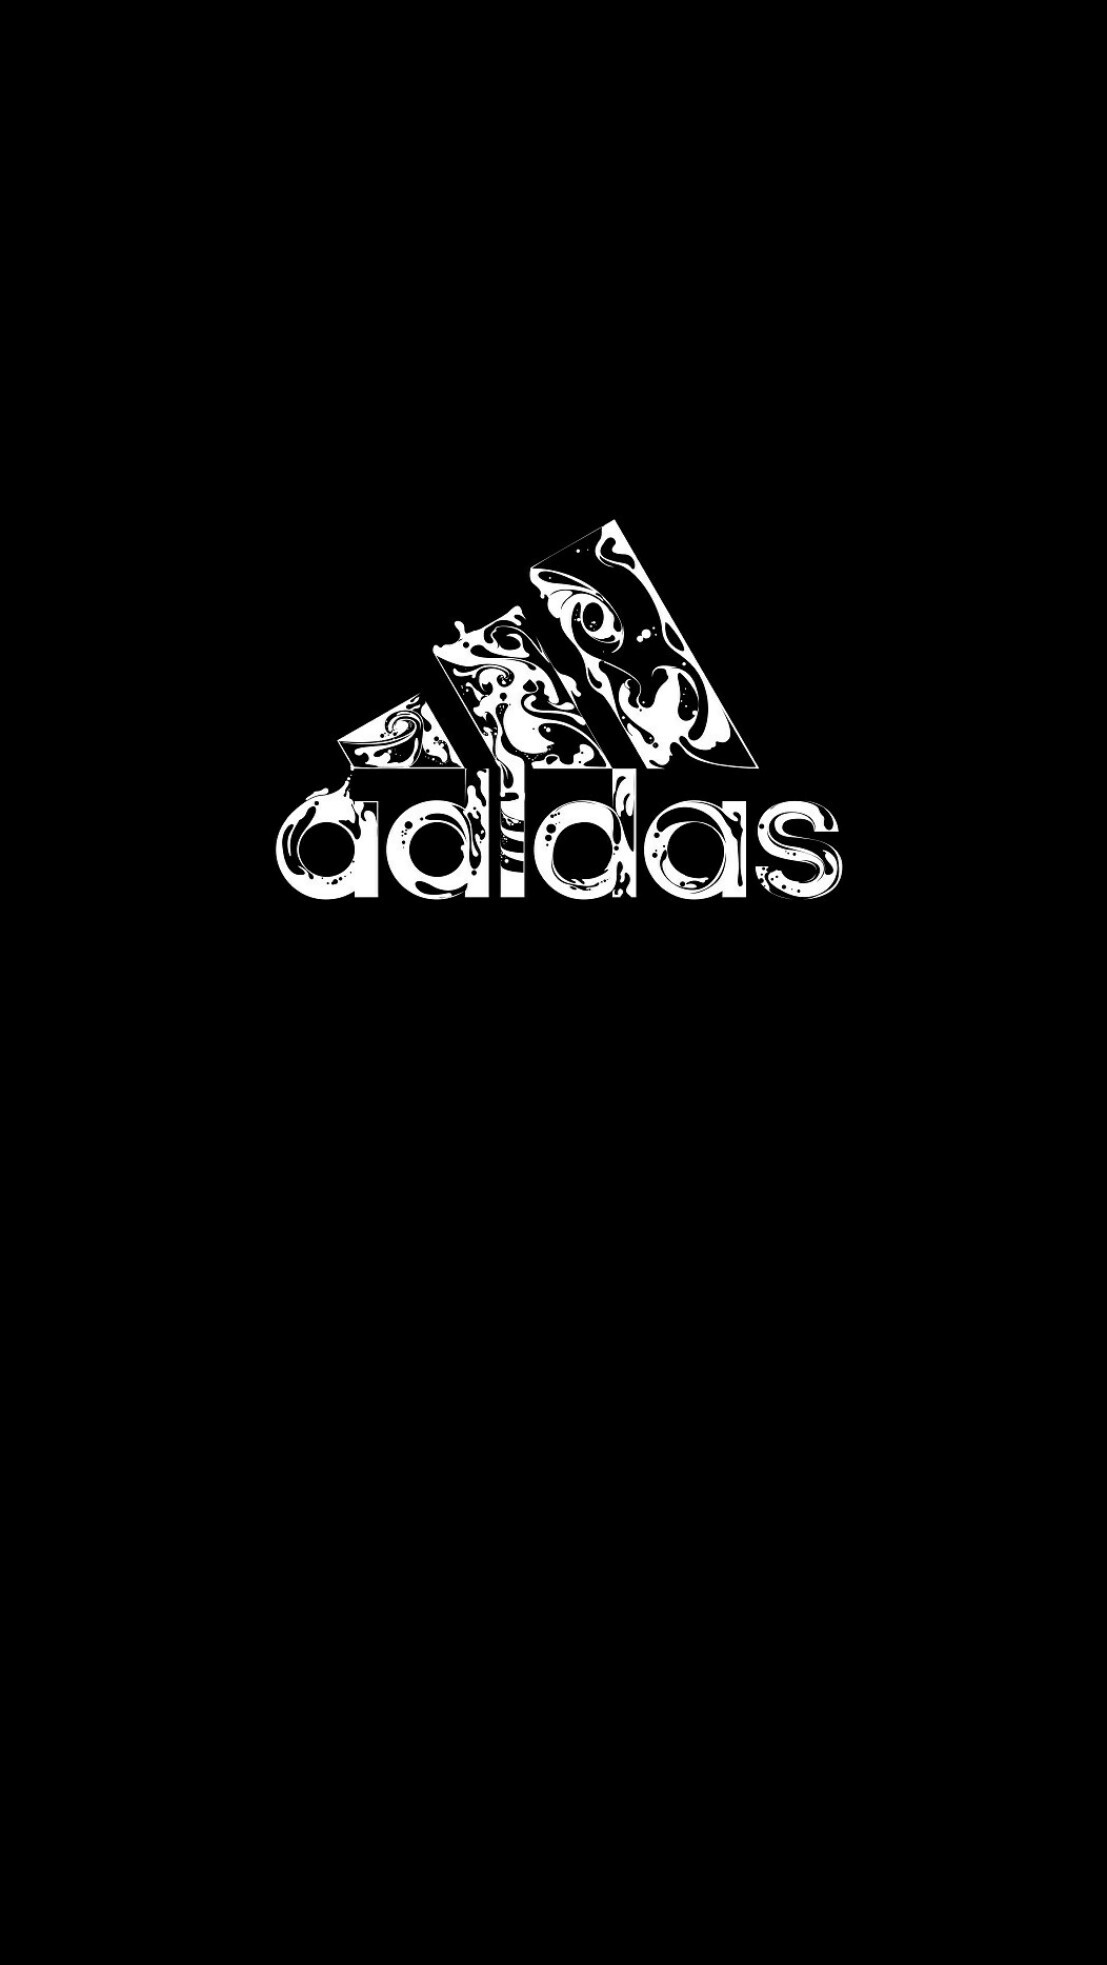 adidas logo for iphone